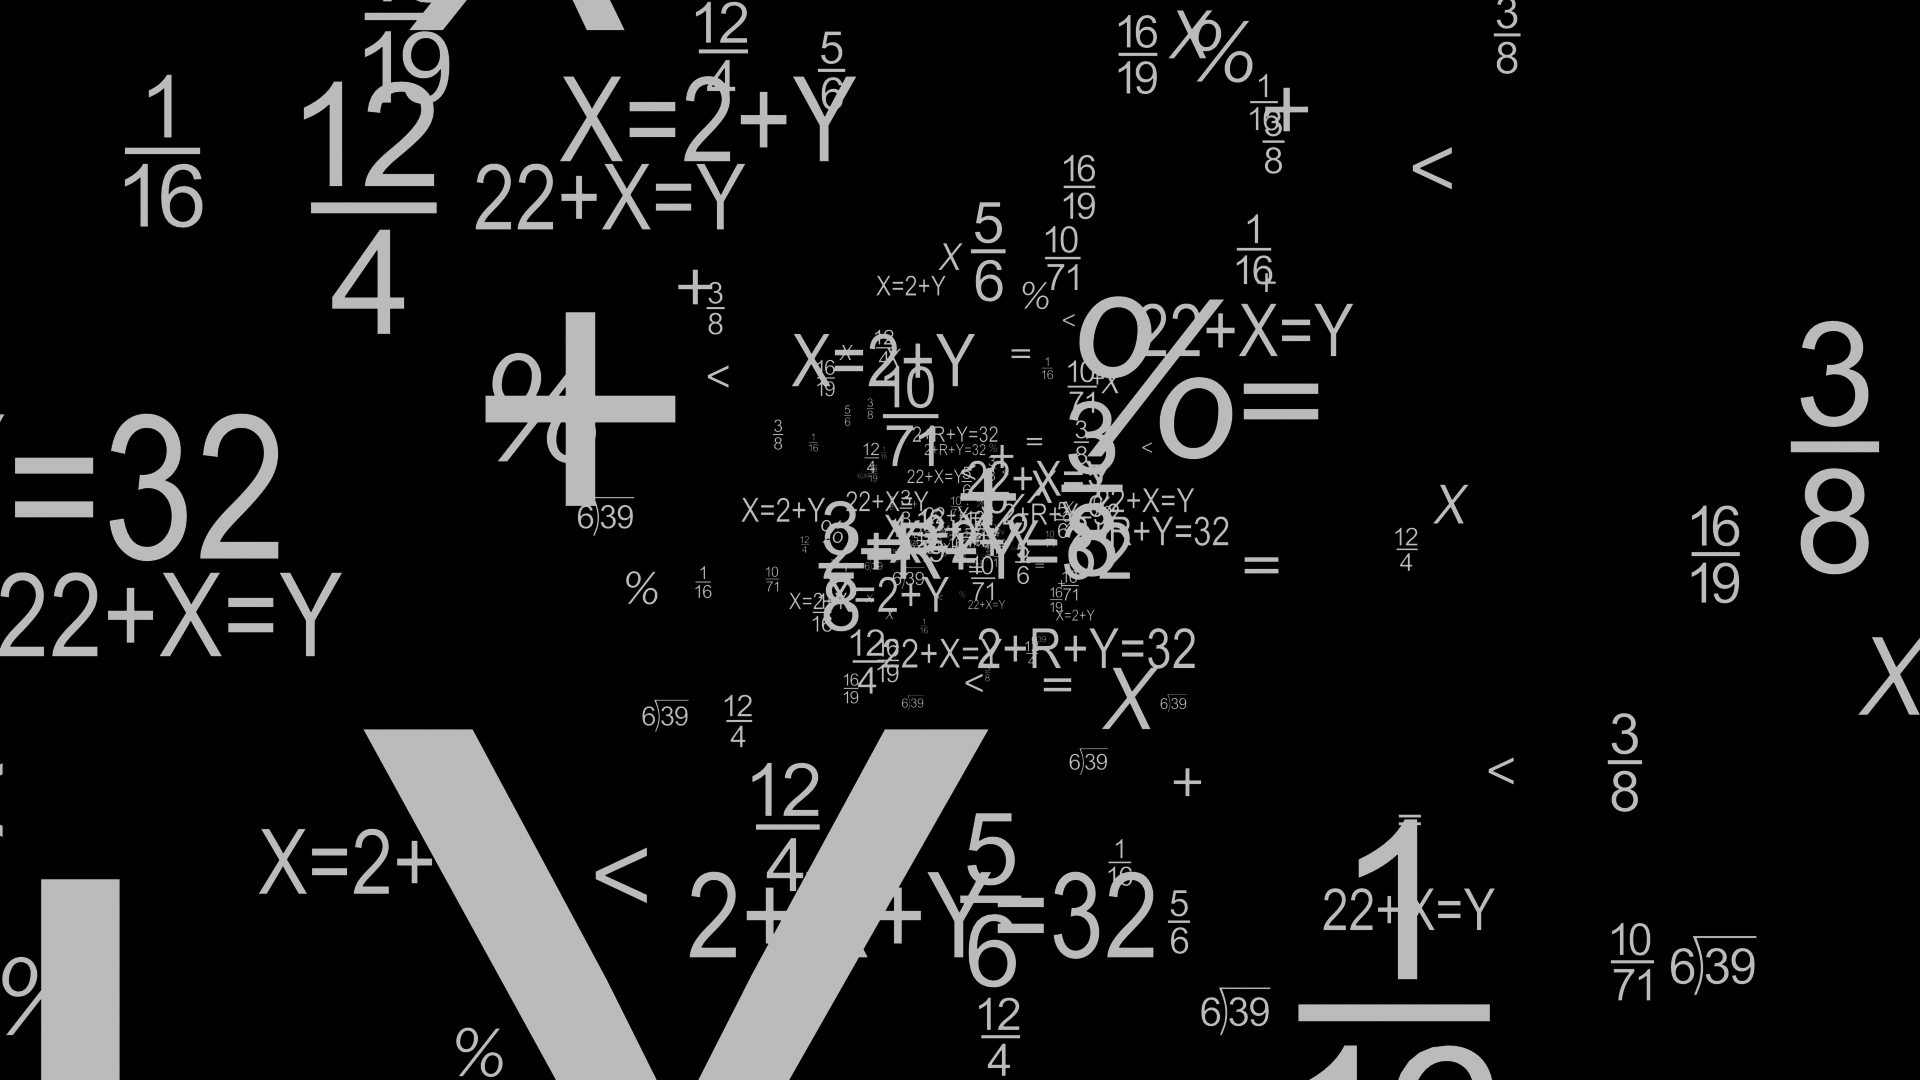 A black and white image of mathematical equations and symbols on a dark background. The equations include addition, subtraction, multiplication, division,百分比, and more. The symbols include parentheses, exponents, and roots. - Math